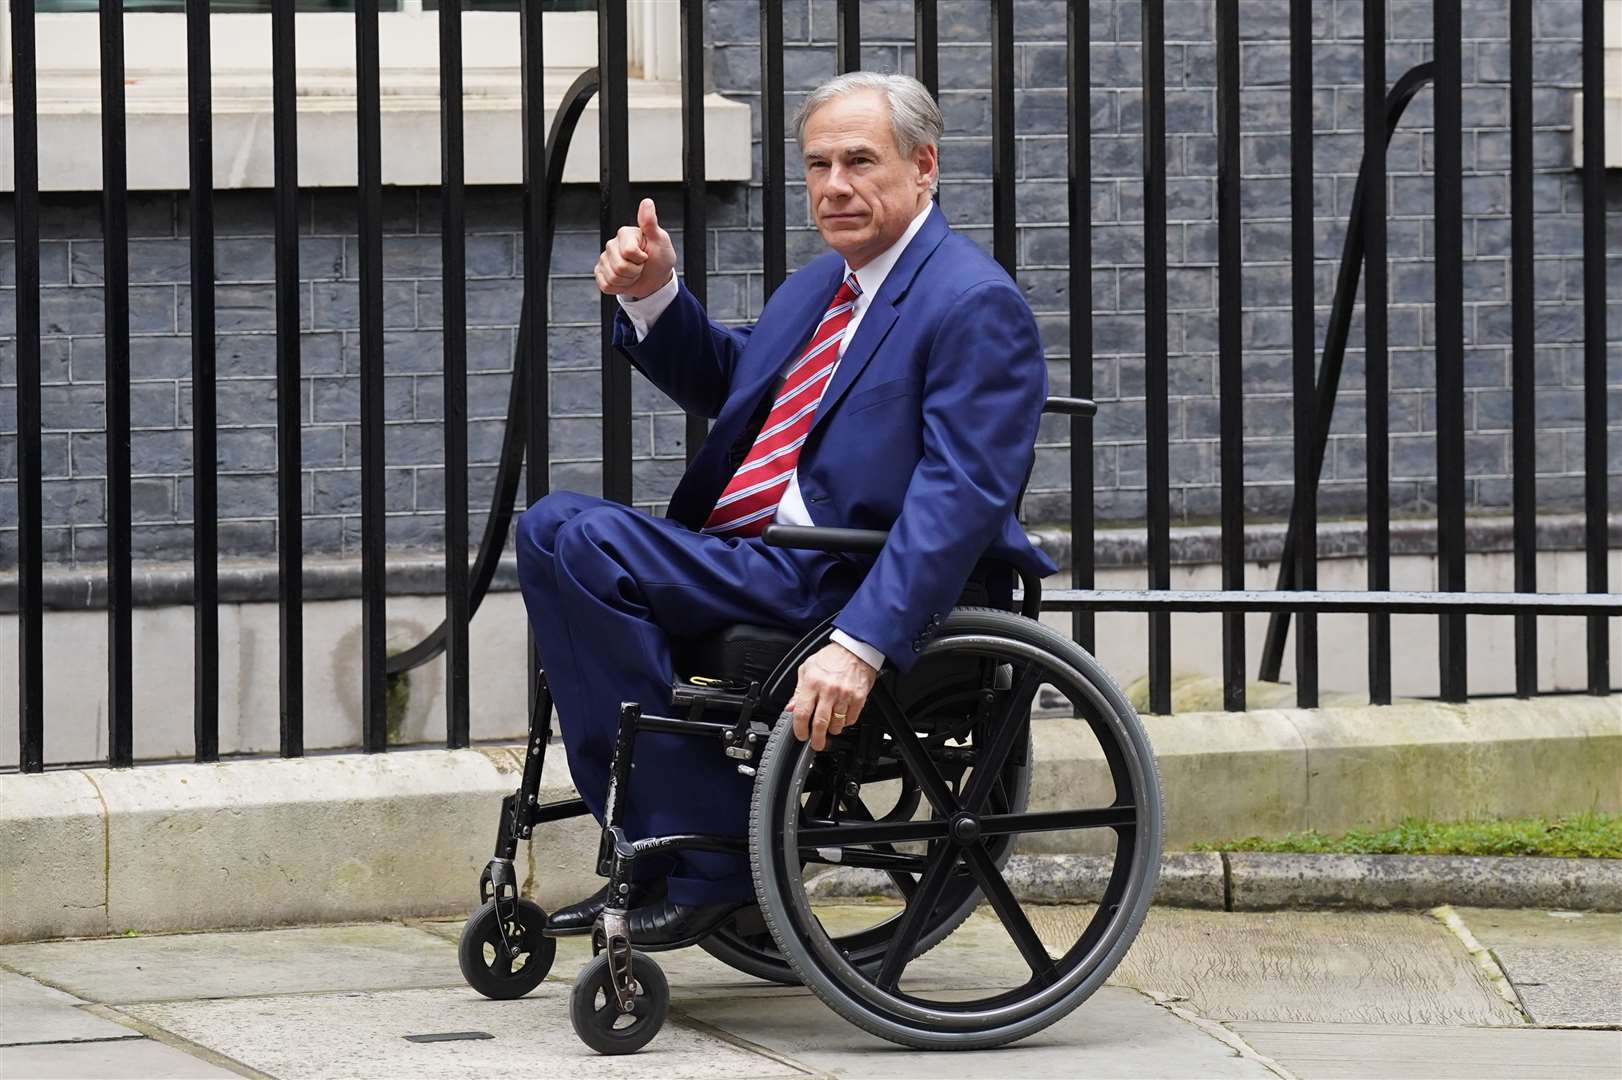 The governor gave a thumbs up when he arrived in Downing Street (Stefan Rousseau/PA)